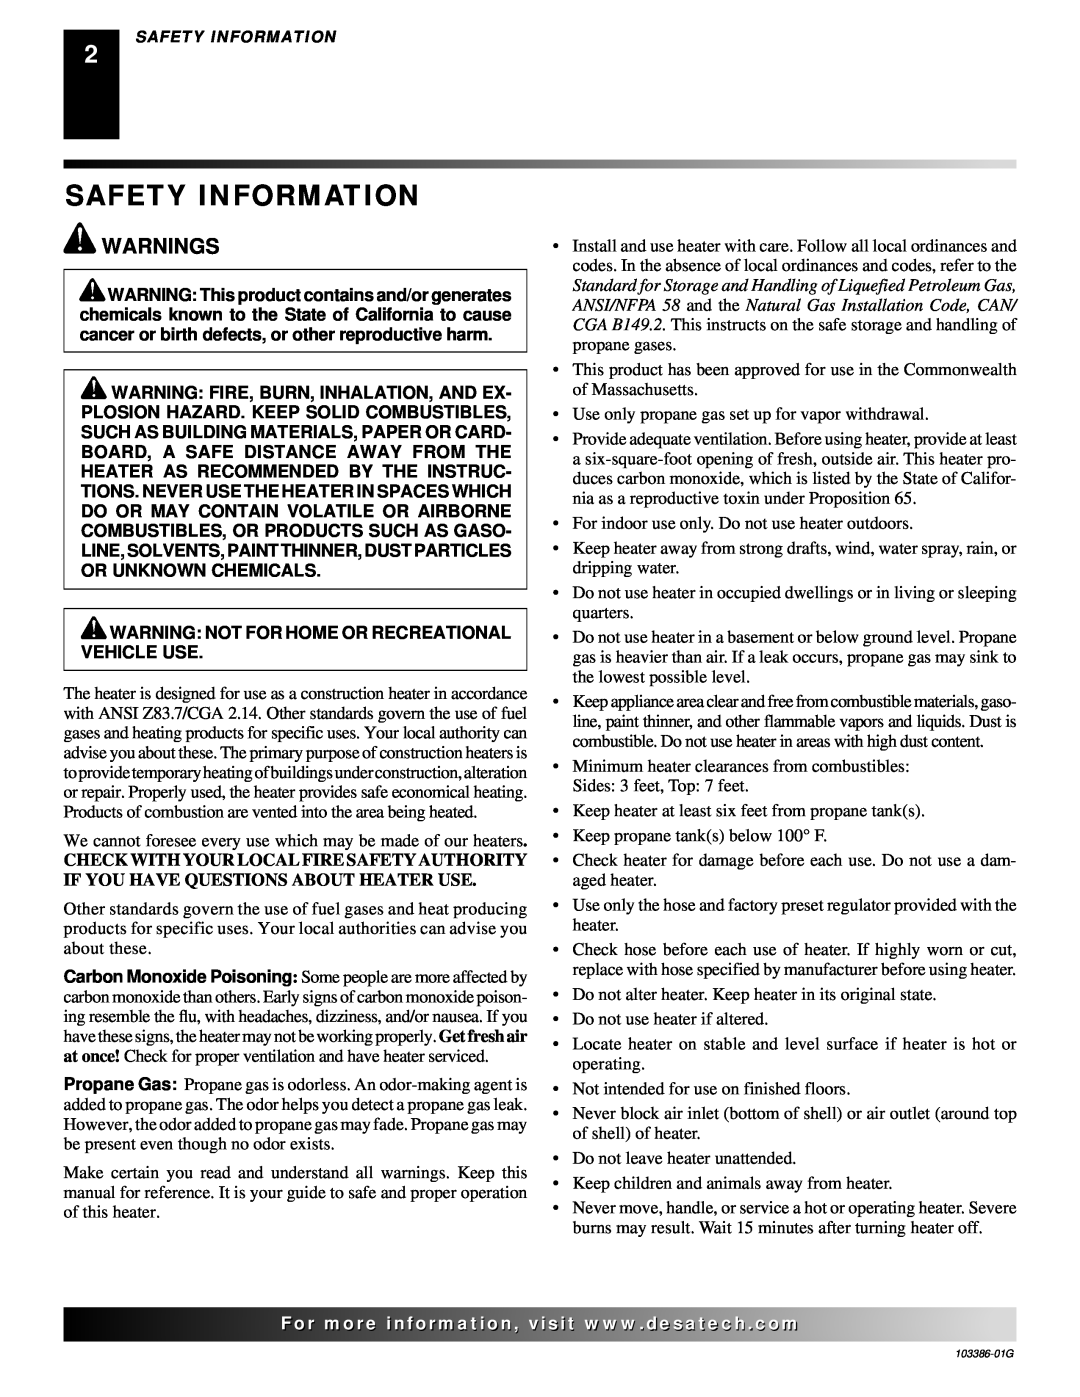 Desa 200 owner manual Safety Information, Warnings, Warning Not For Home Or Recreational Vehicle Use 